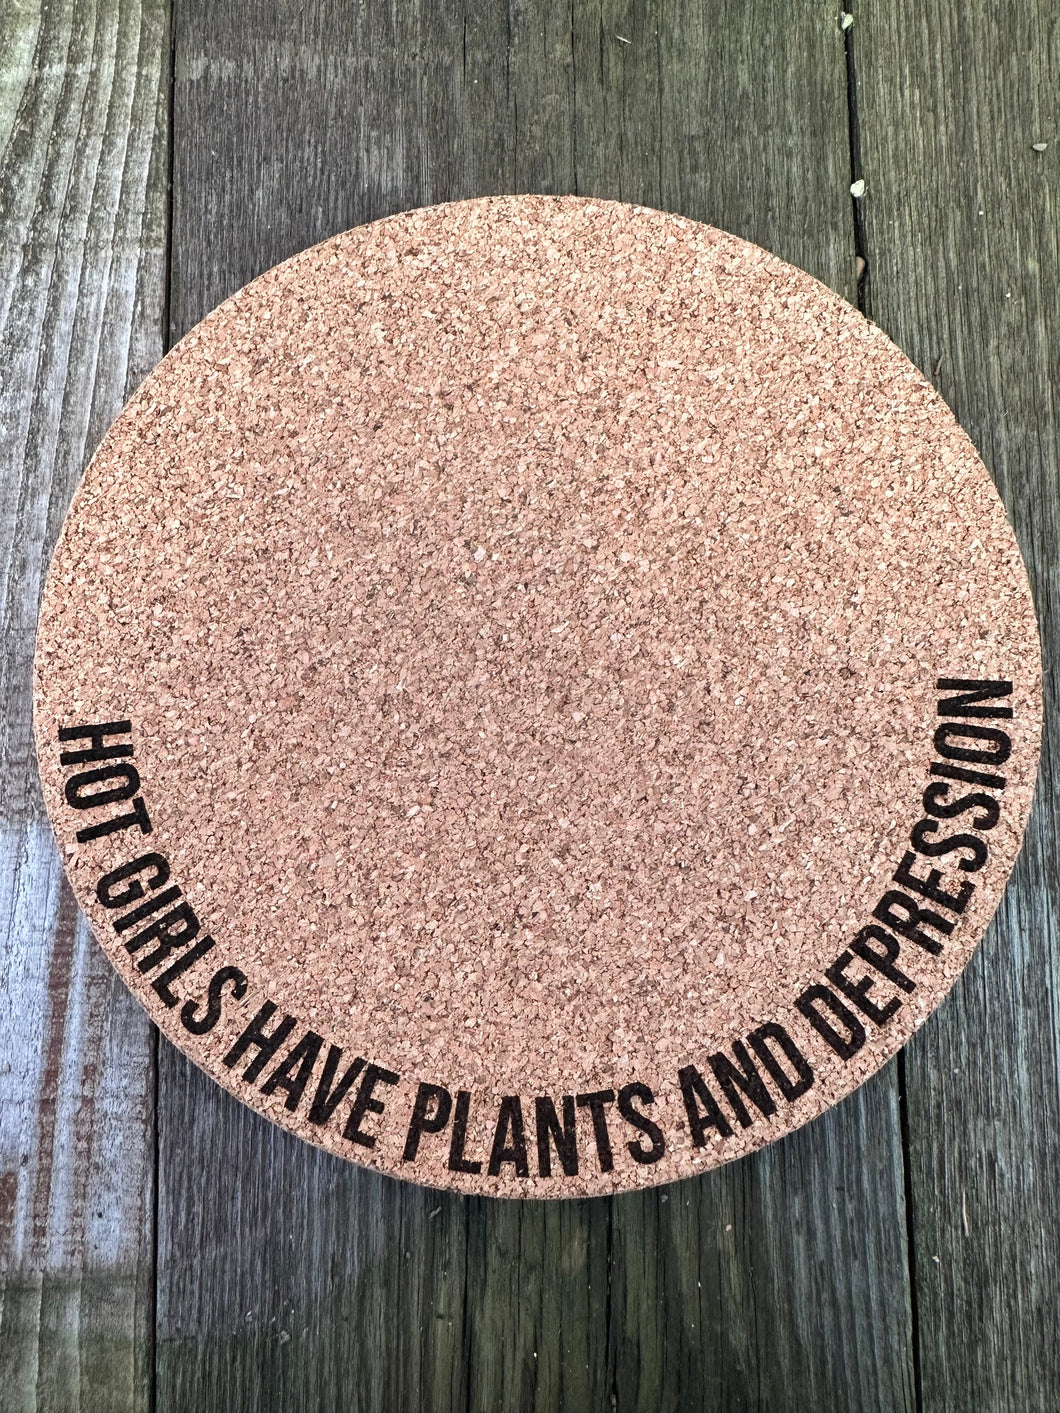 Hot Girls Kill Plants Cork Plant Mat - Engraved Cork Round - Cork Bottom - No Plastic or Rubber - All Natural Material